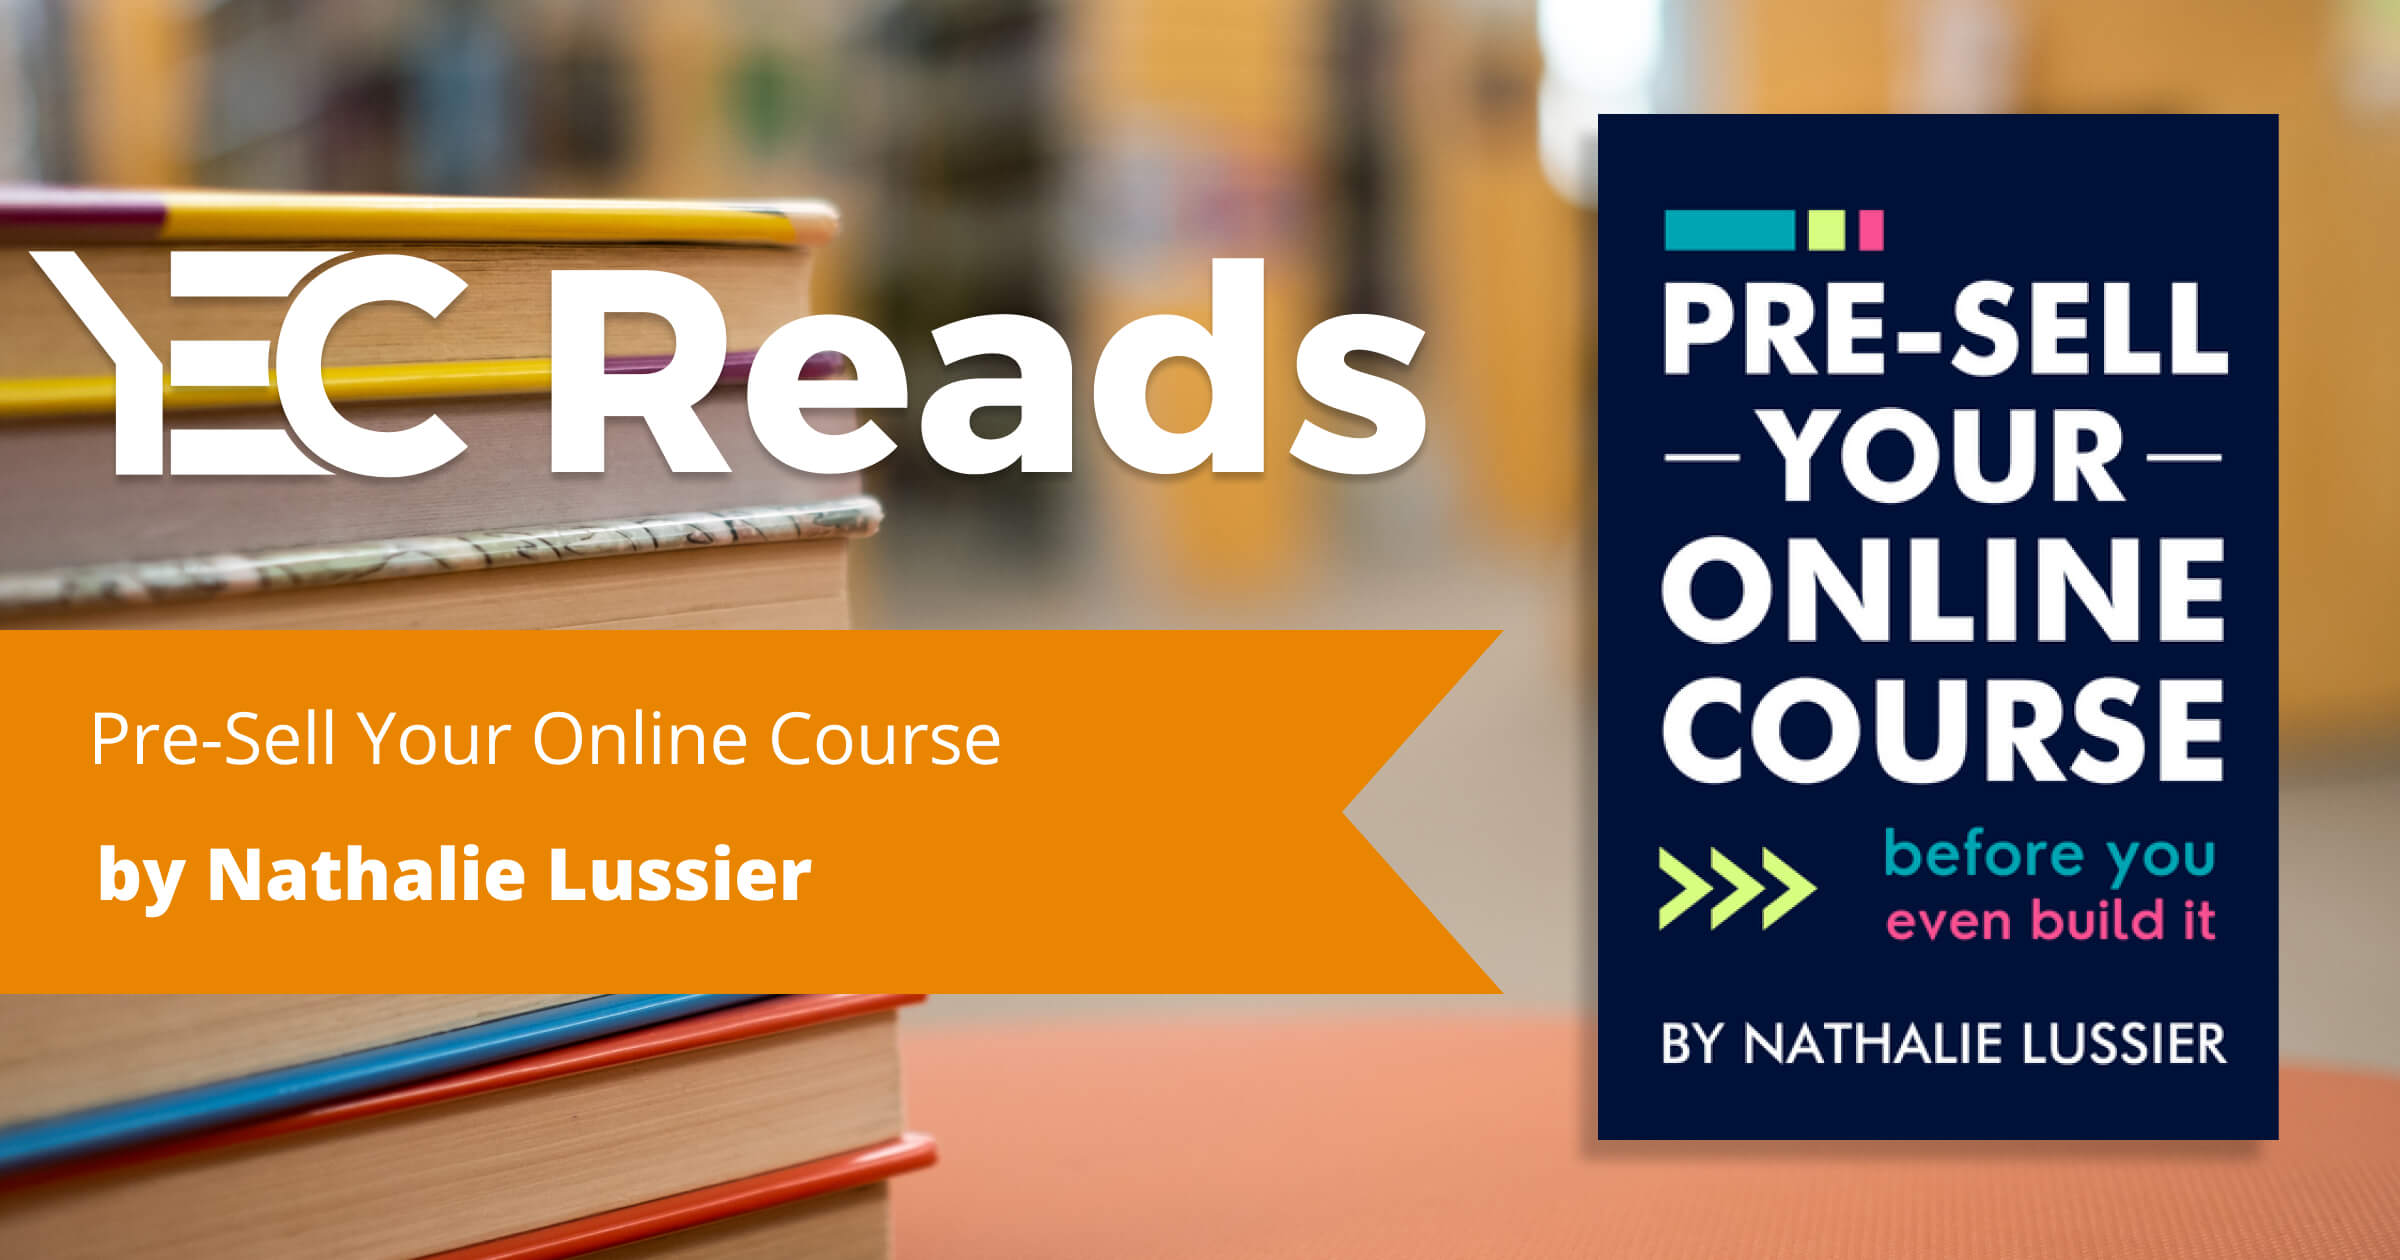 YEC Reads: Pre-Sell Your Online Course by Nathalie Lussier